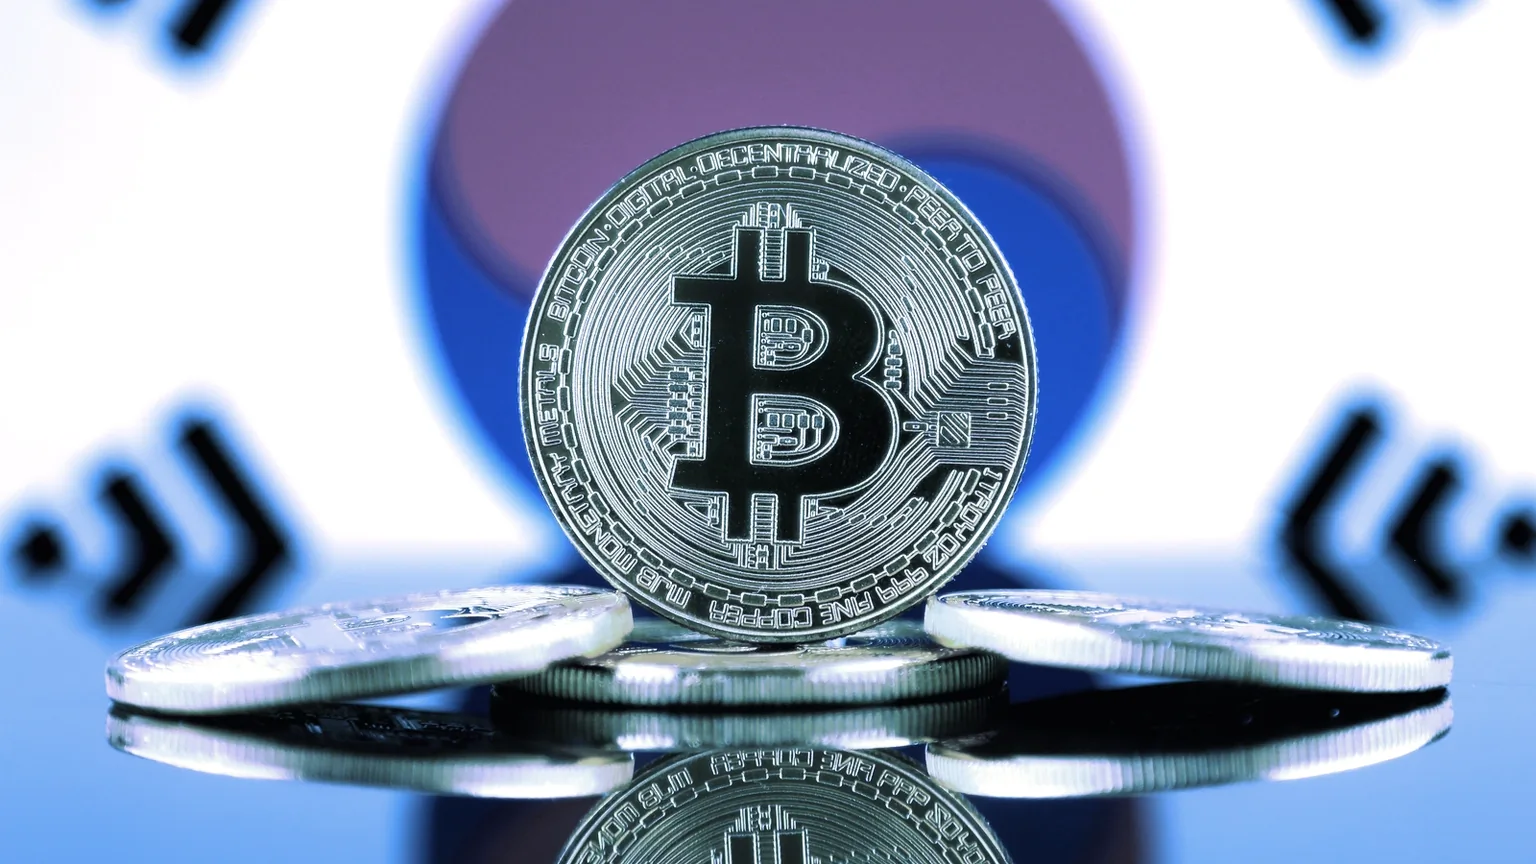 South Korea and Bitcoin. Image: Shutterstock